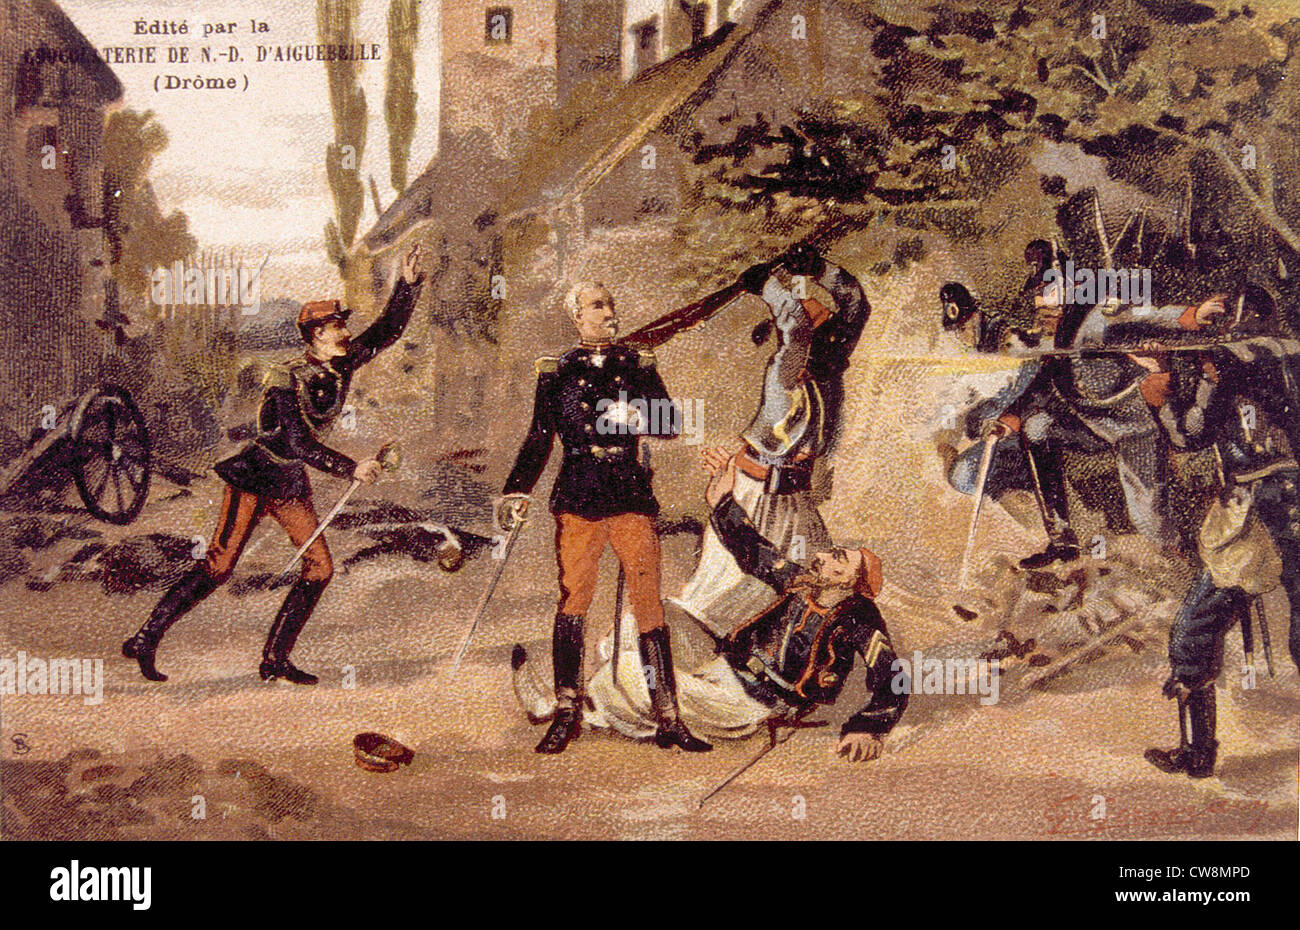 The War of 1870, advertisement Stock Photo